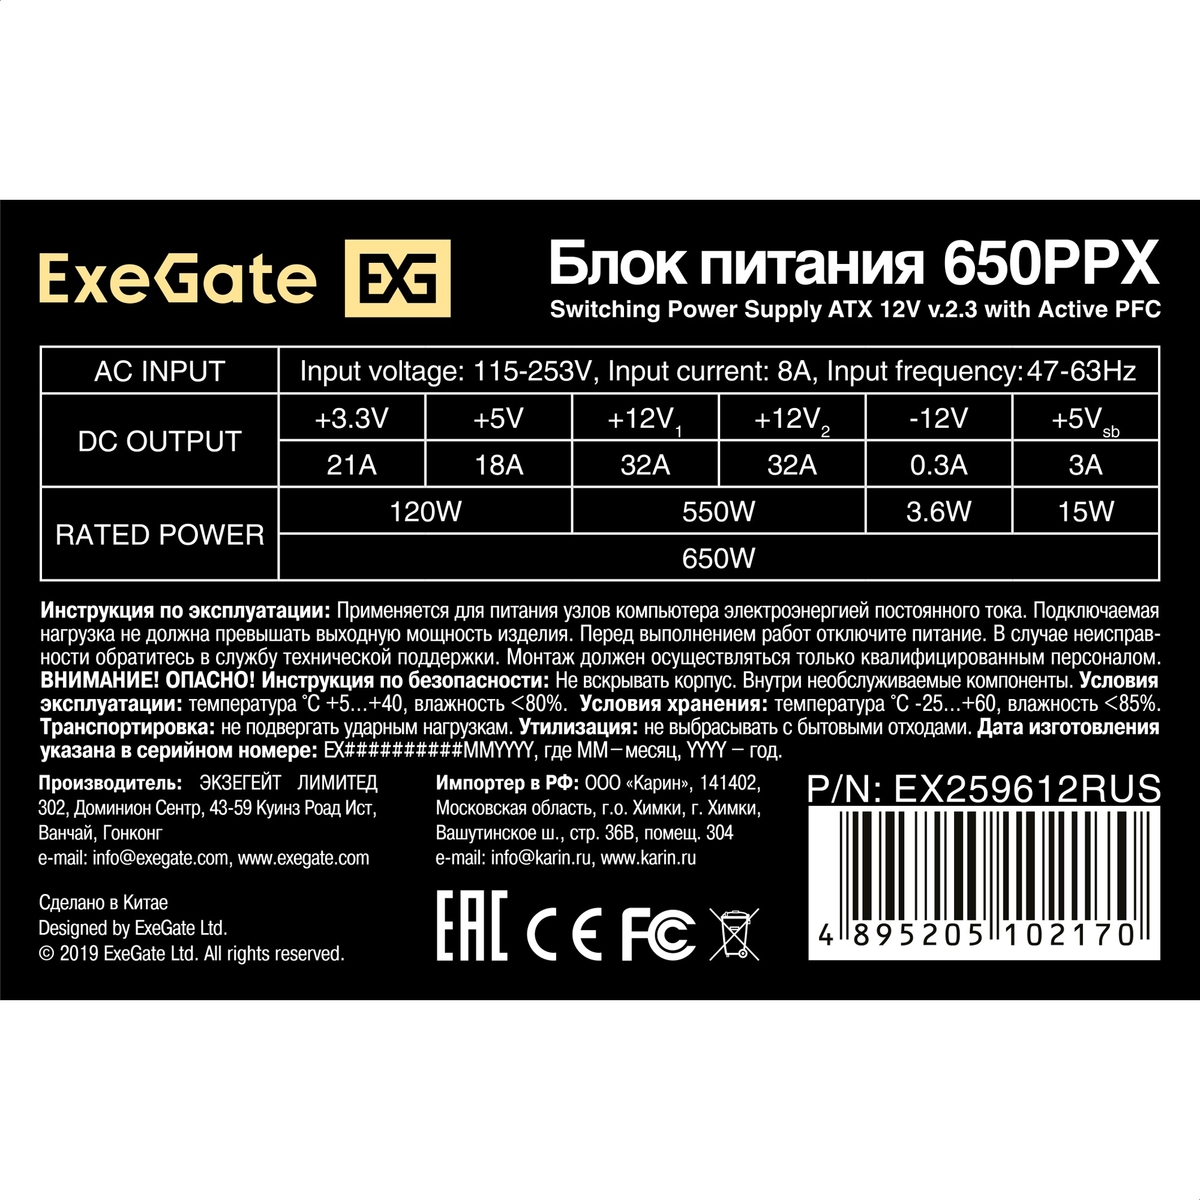  650W ExeGate 650PPX